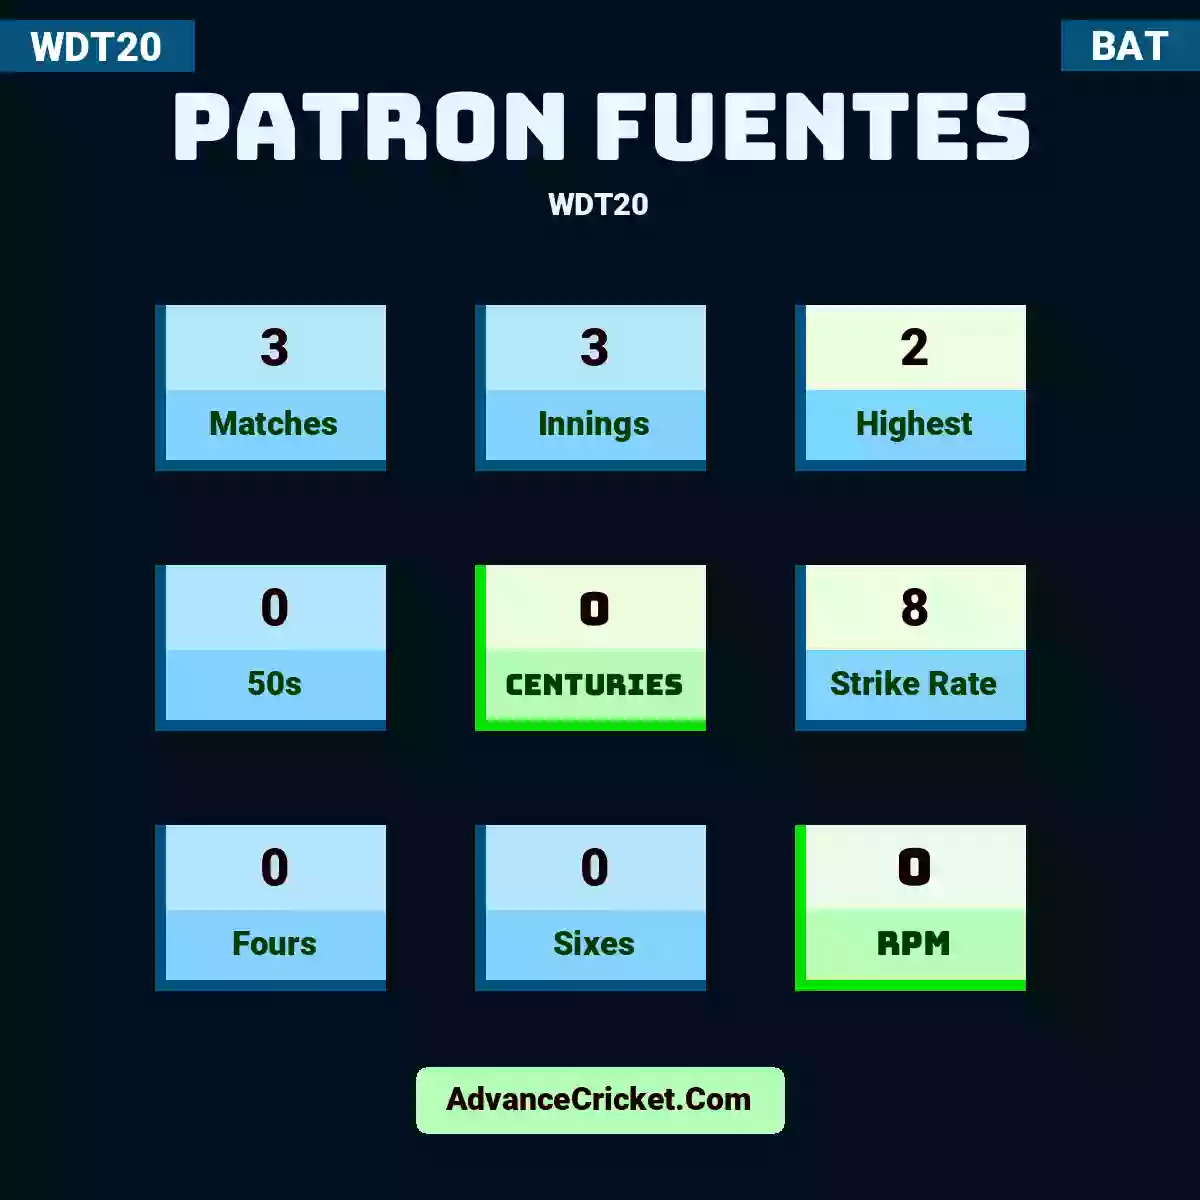 Patron Fuentes WDT20 , Patron Fuentes played 3 matches, scored 2 runs as highest, 0 half-centuries, and 0 centuries, with a strike rate of 8. P.Fuentes hit 0 fours and 0 sixes, with an RPM of 0.